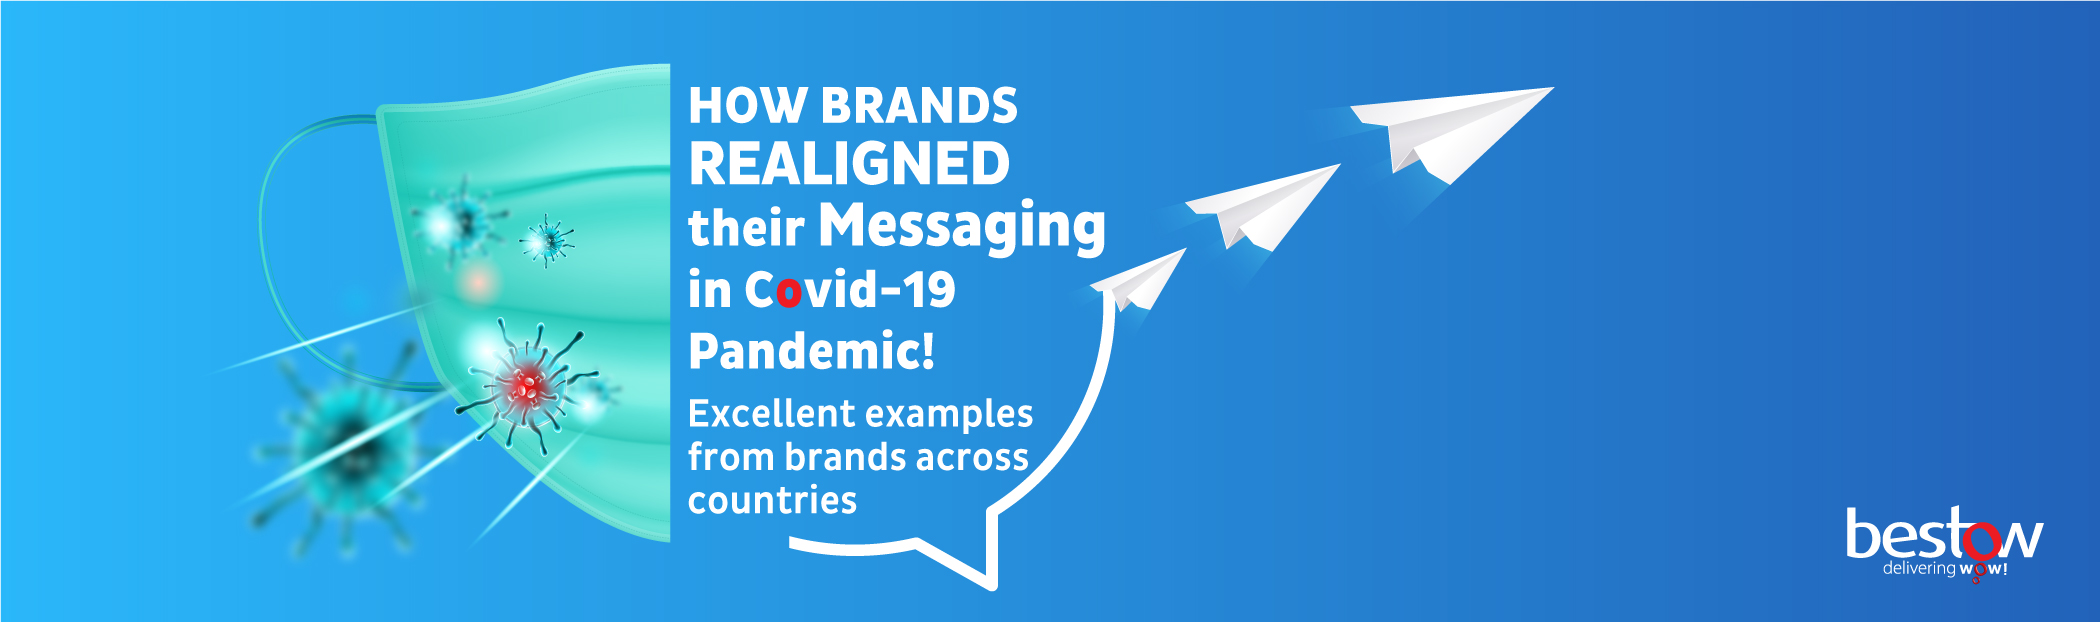 Brand Crisis Management | Creative Messages during COVID-19 | Bestow